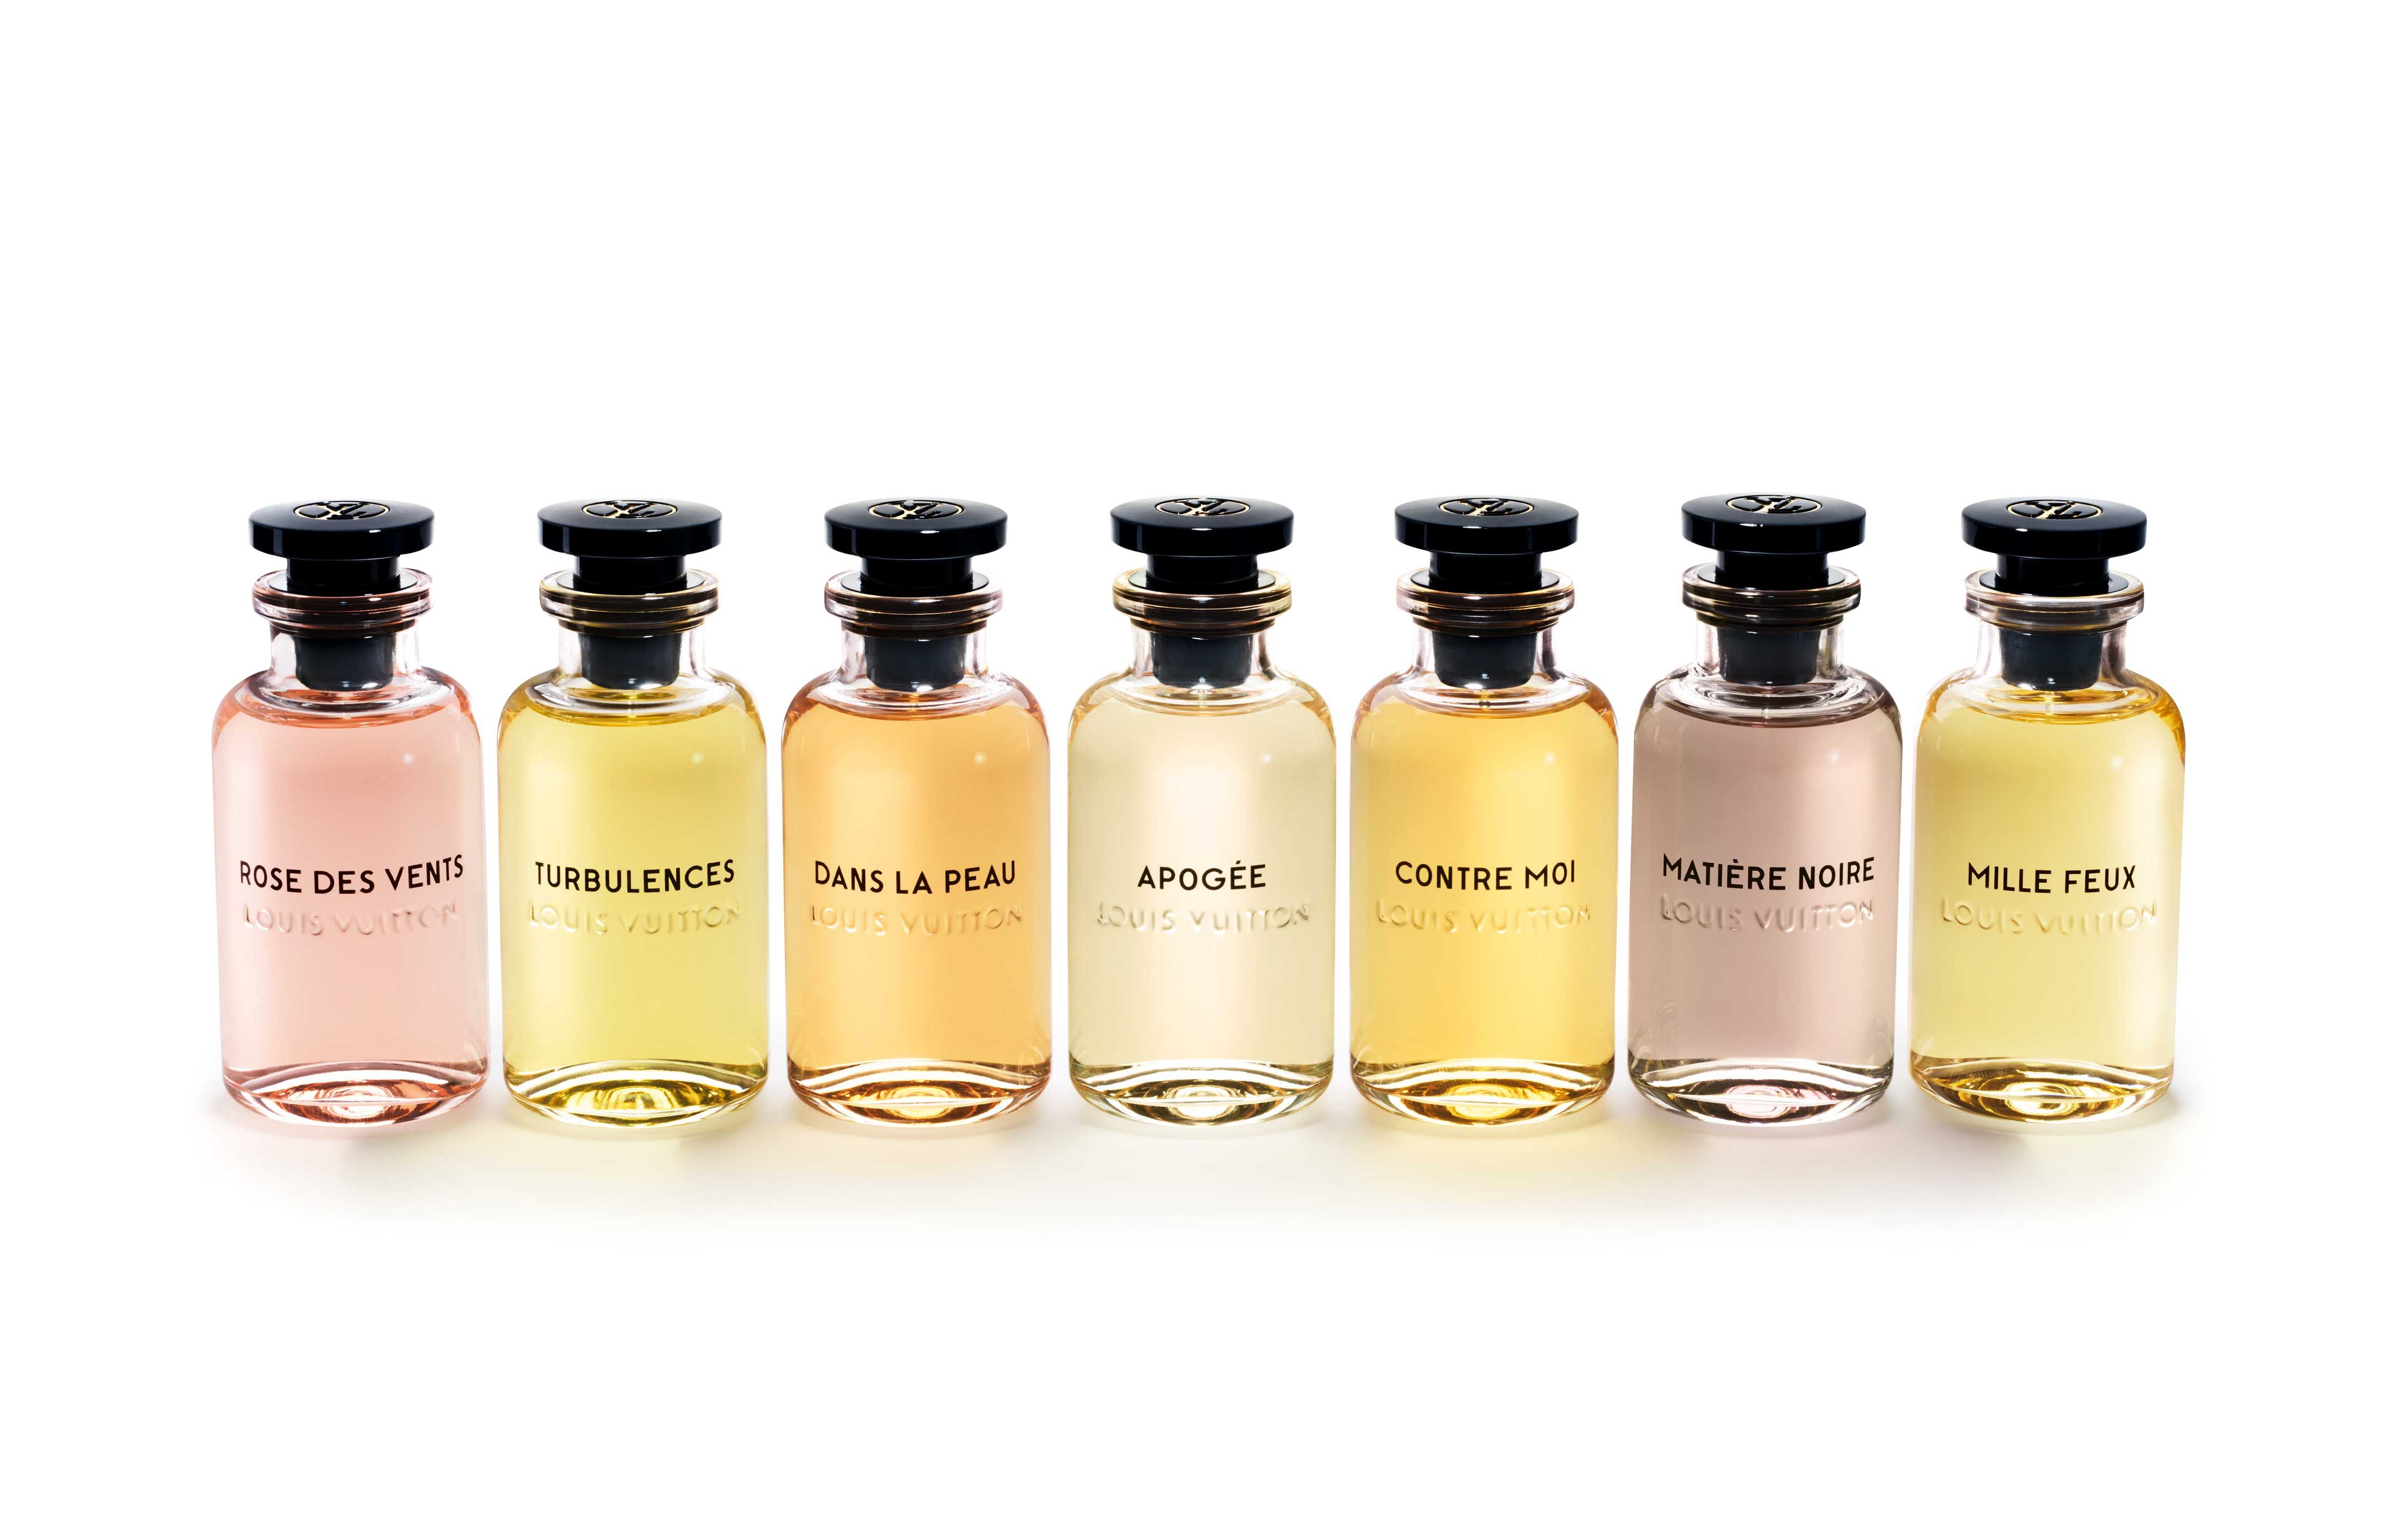 When Louis Vuitton turns its perfume bottles into true works of art